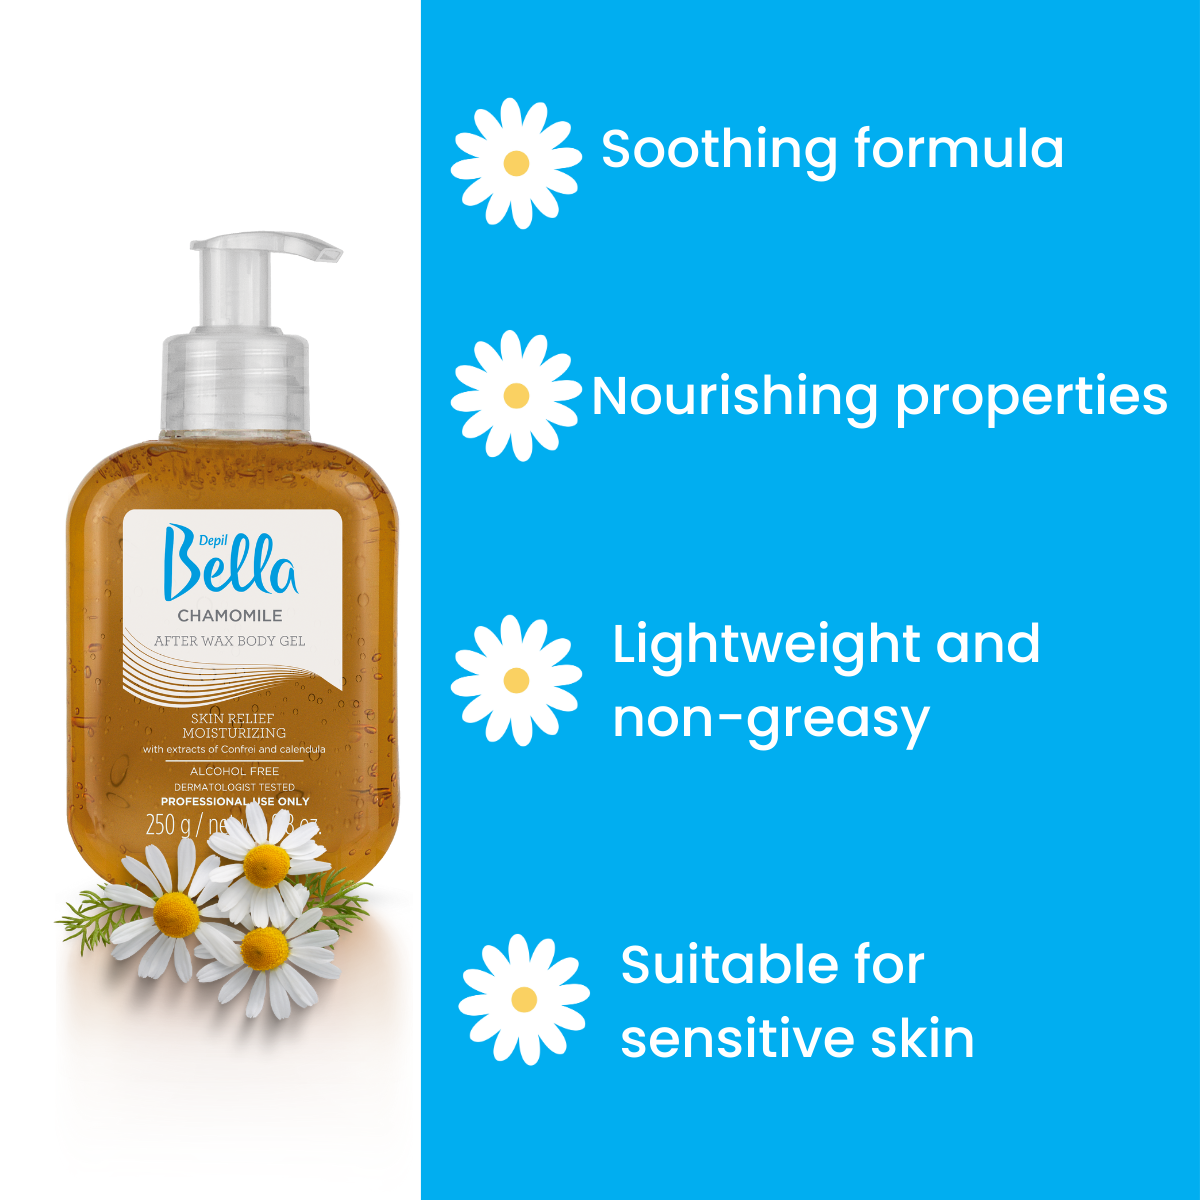 Depil Bella Chamomile Post-Waxing Body Gel 250g (3 Units Offer)